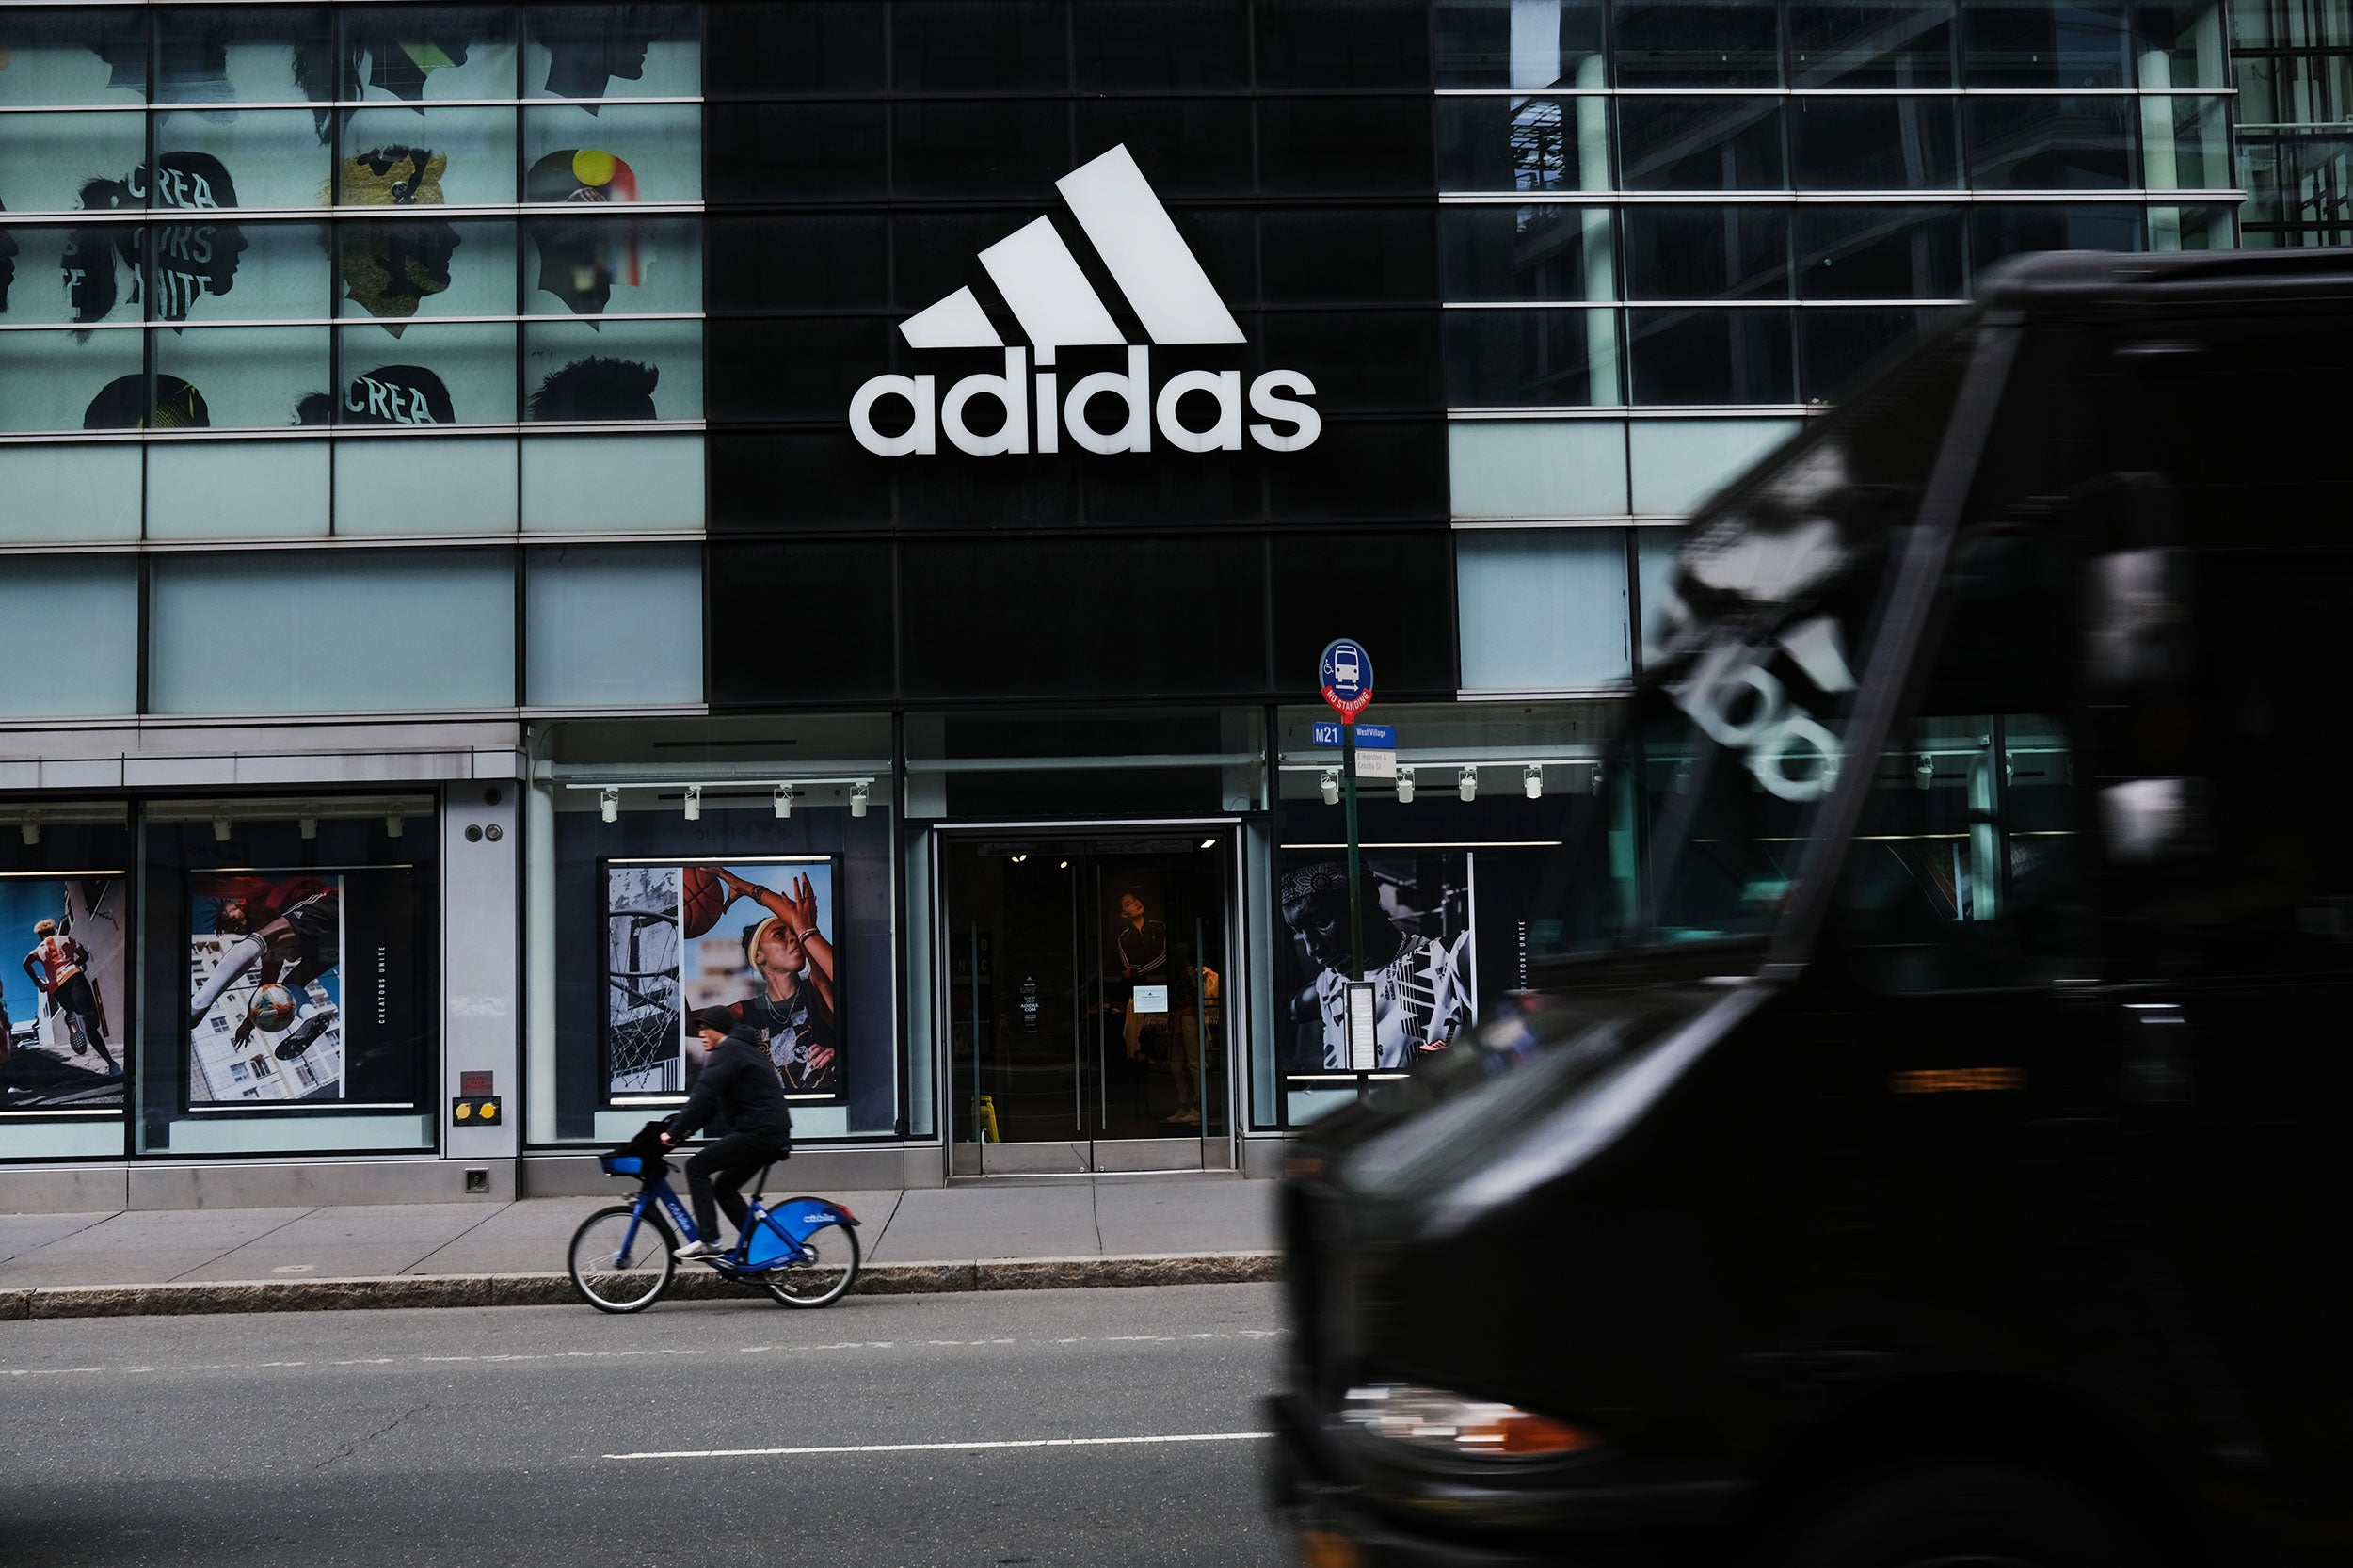 what company is adidas